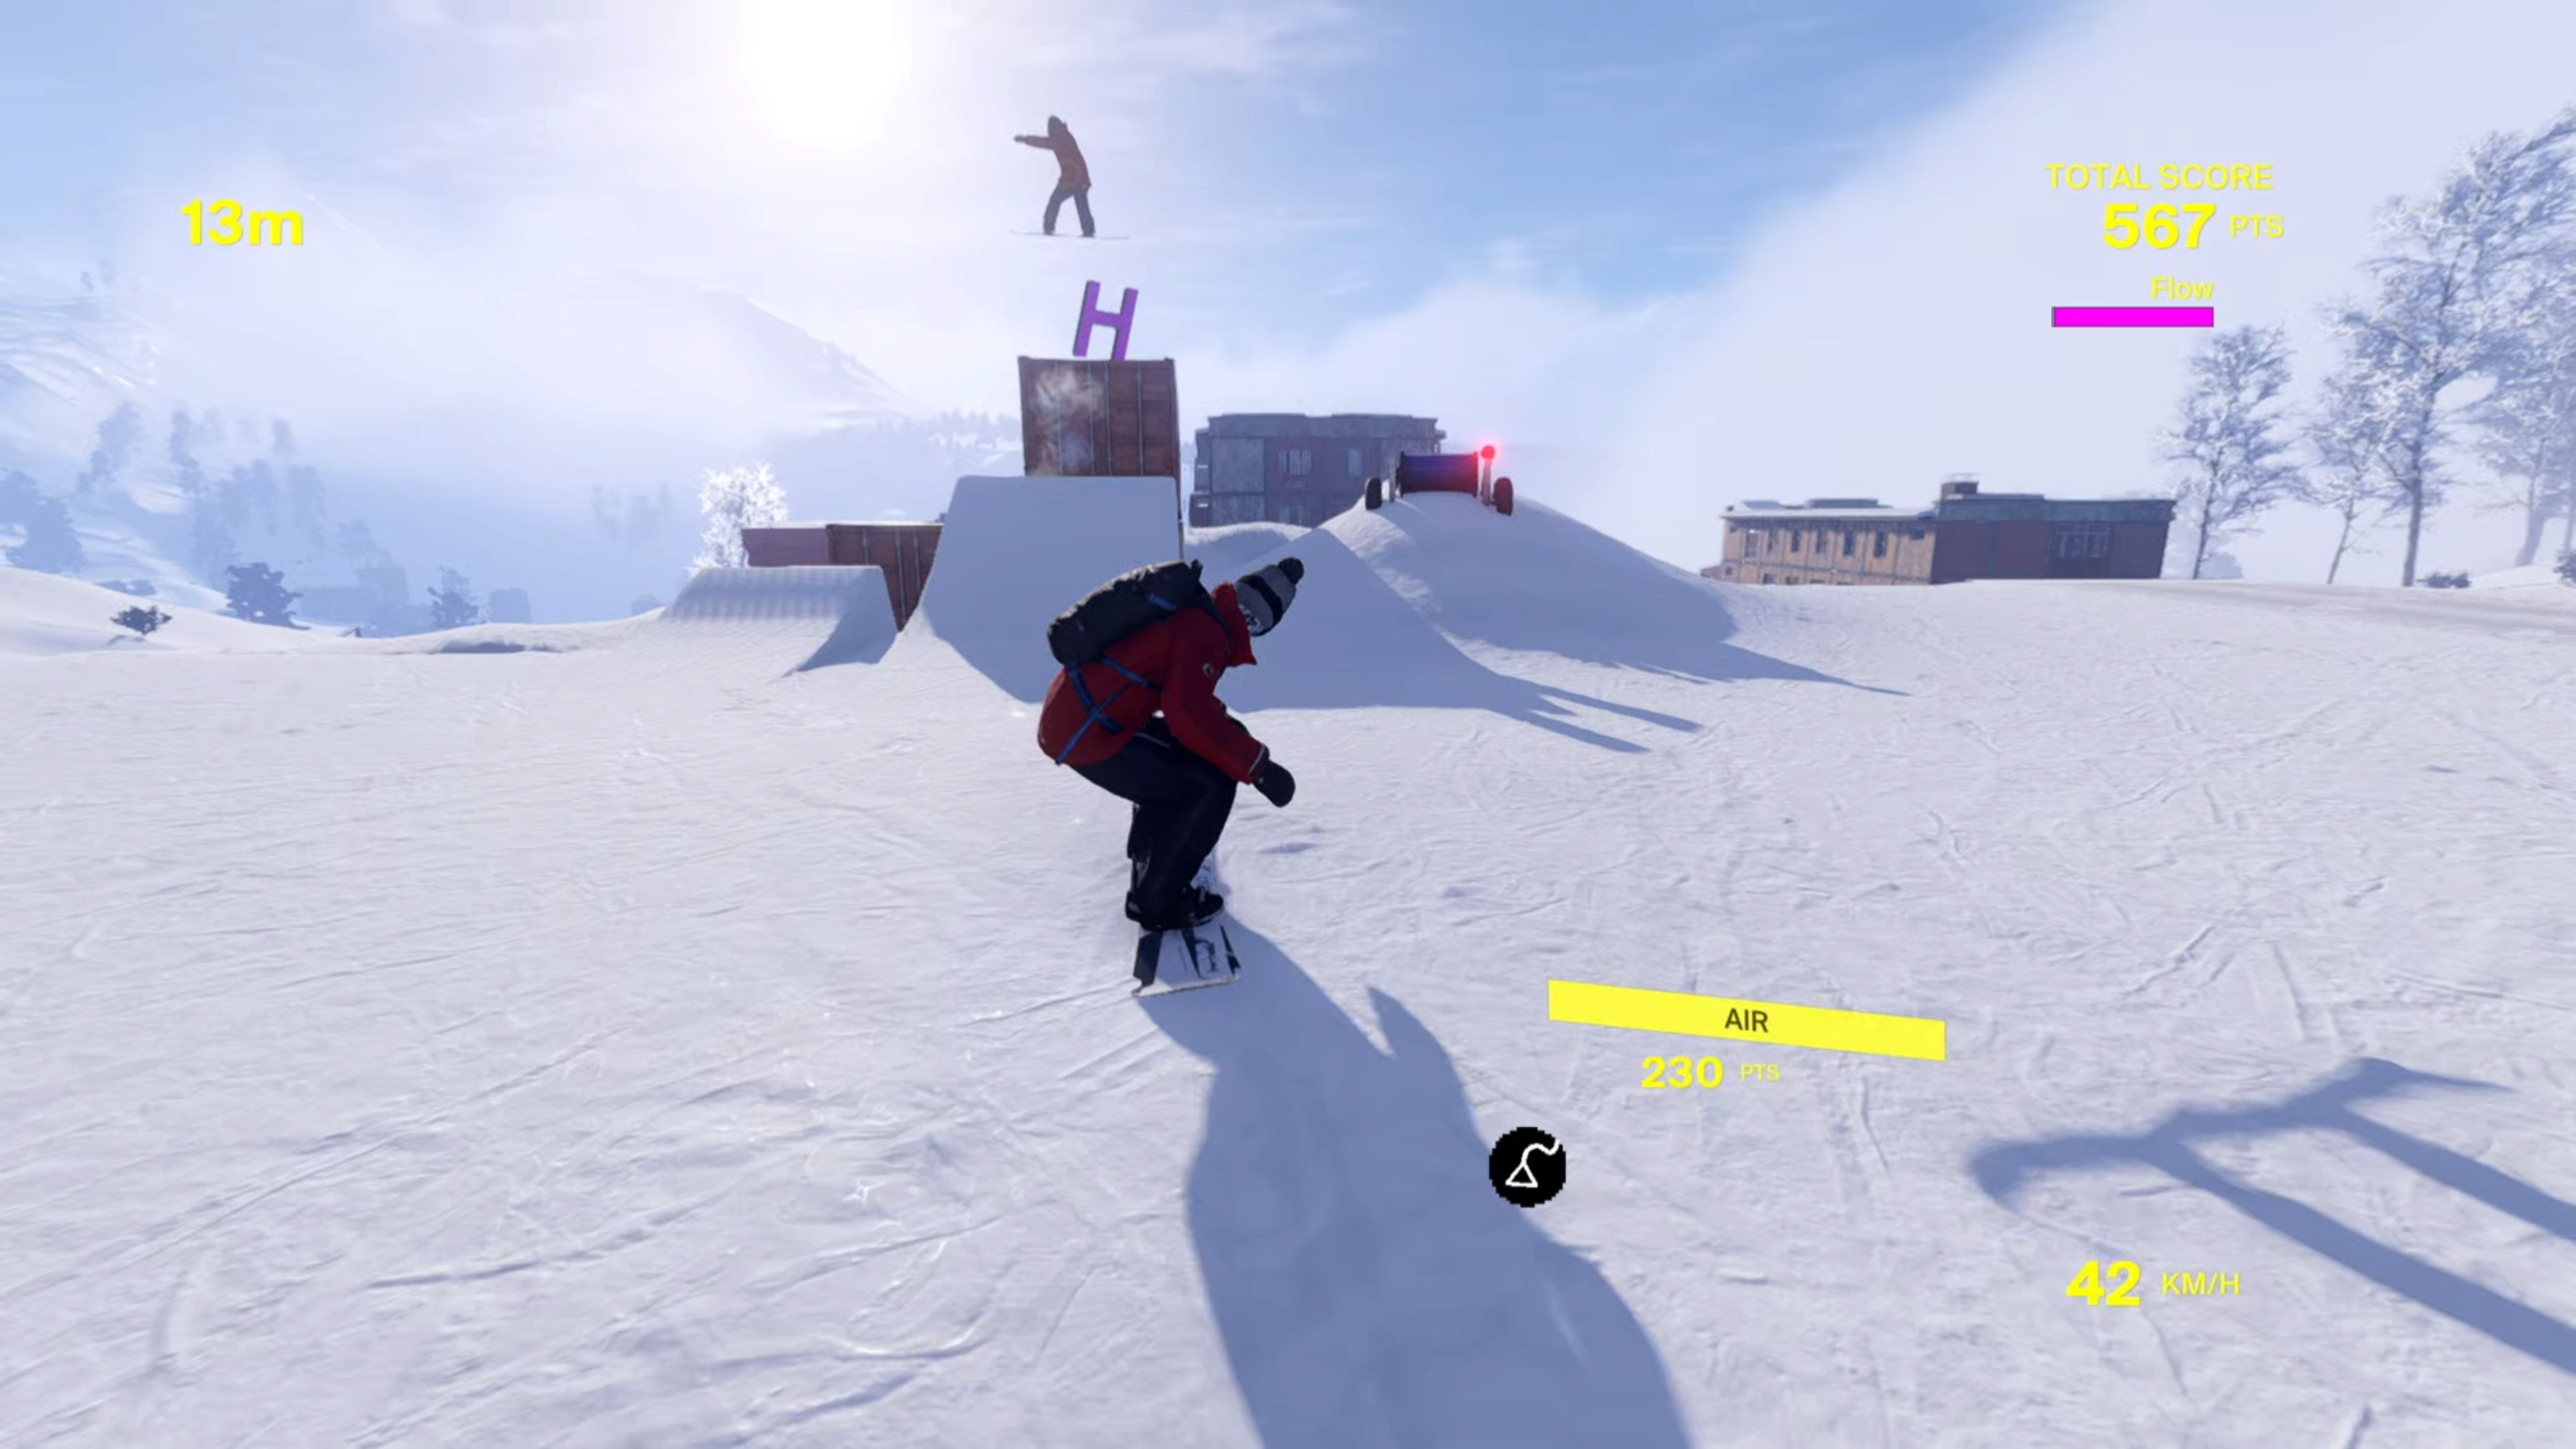 Gameplay screenshot of Shredders on PS5 showing the player following an computer controlled character in the center wearing a red jacket, black trousers, a grey bobble hat and a black backpack on their back, hunched down as they line up for a jump onto the top of a steel container. The computer controlled chatracter is mid jump about to land on the steel container. The games heads up display shows the players total trick score in the top right which reads 567 points. The bottom right shows the players current speed which is 42km/h. The top left reads 13m which is the distant between the two characters performing the jumps